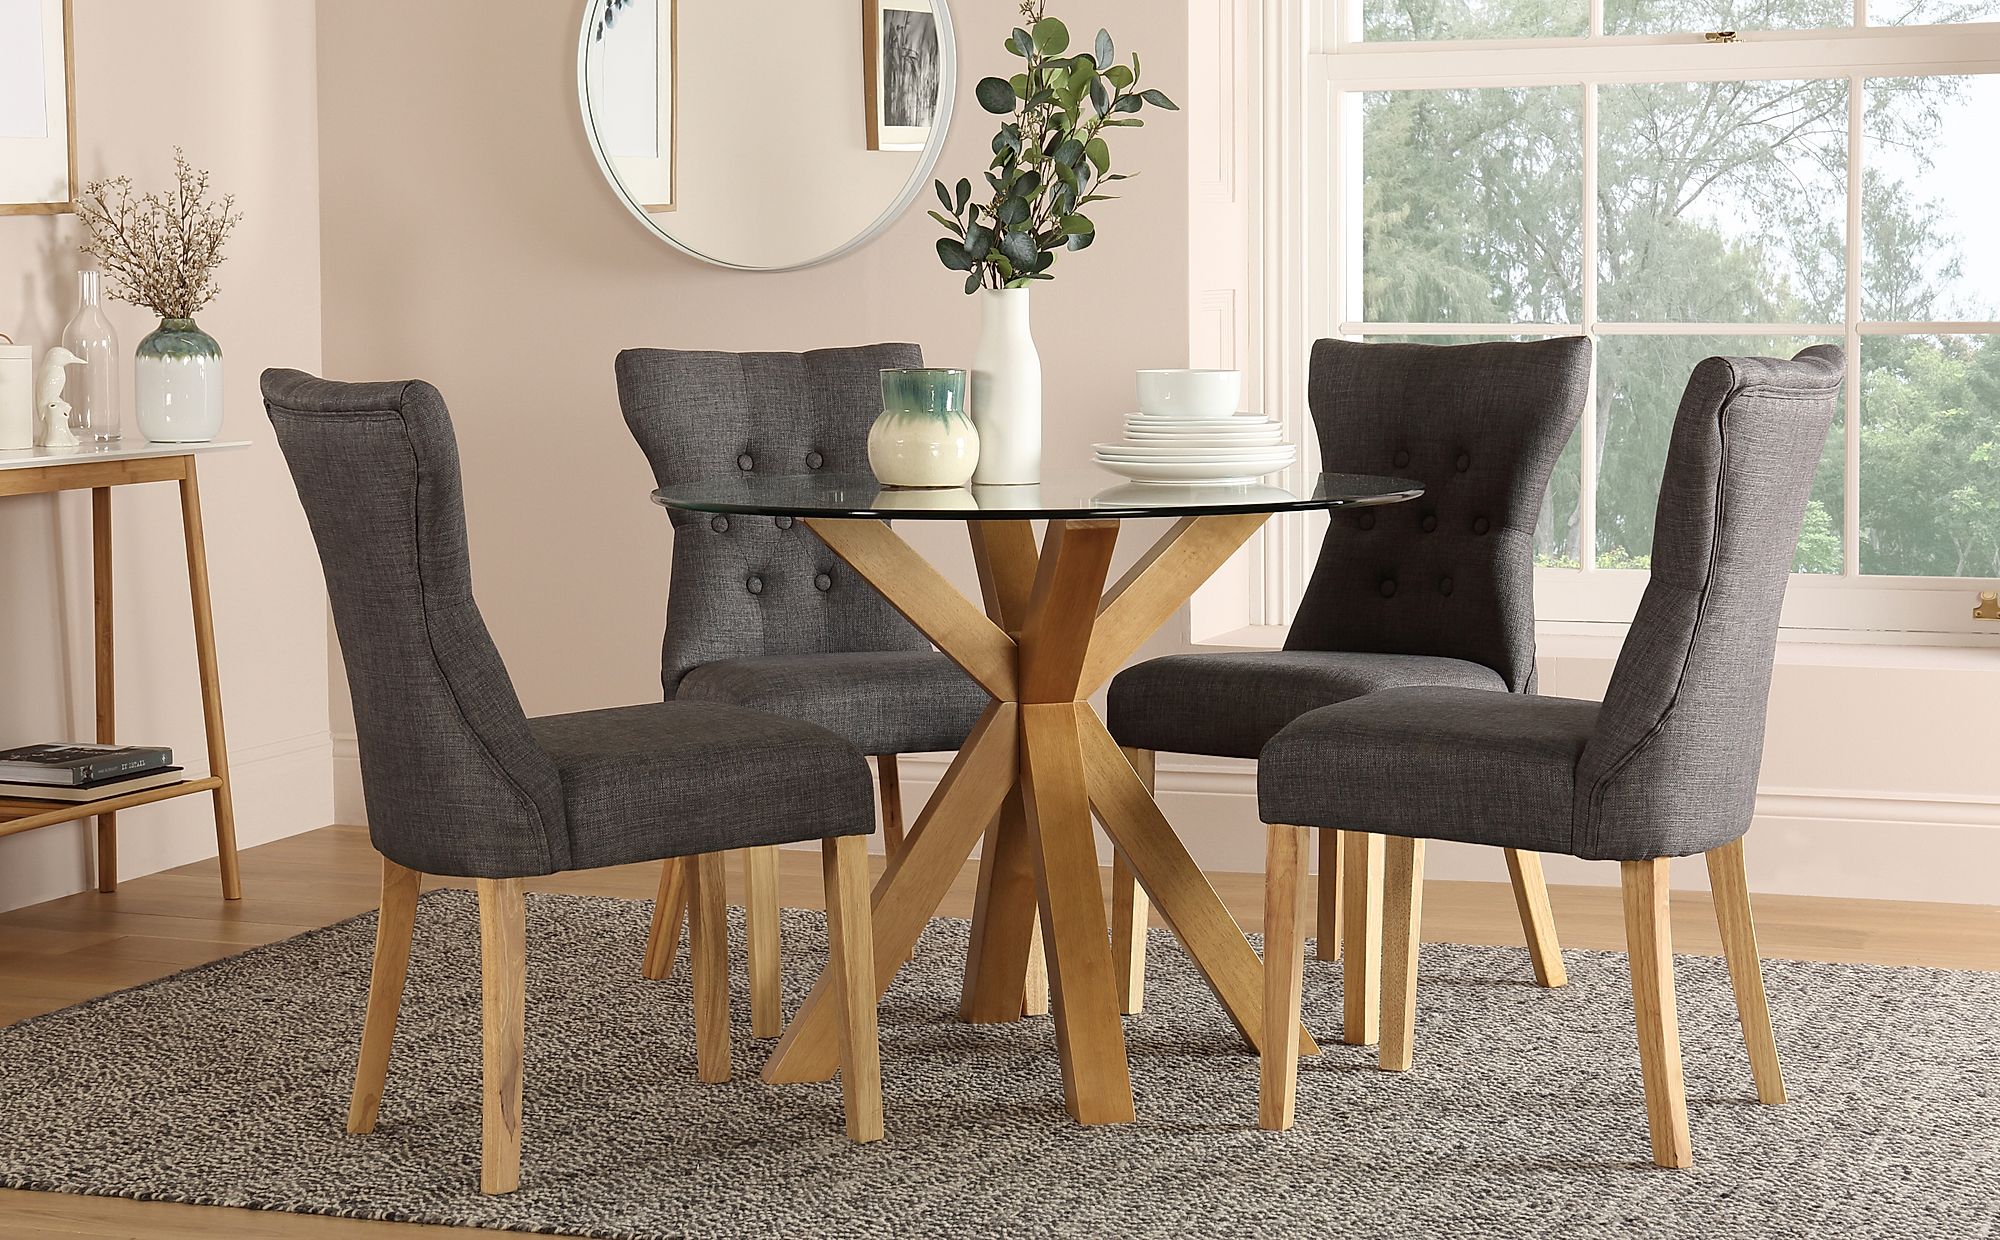 Dining Room Tables And Chairs Uk